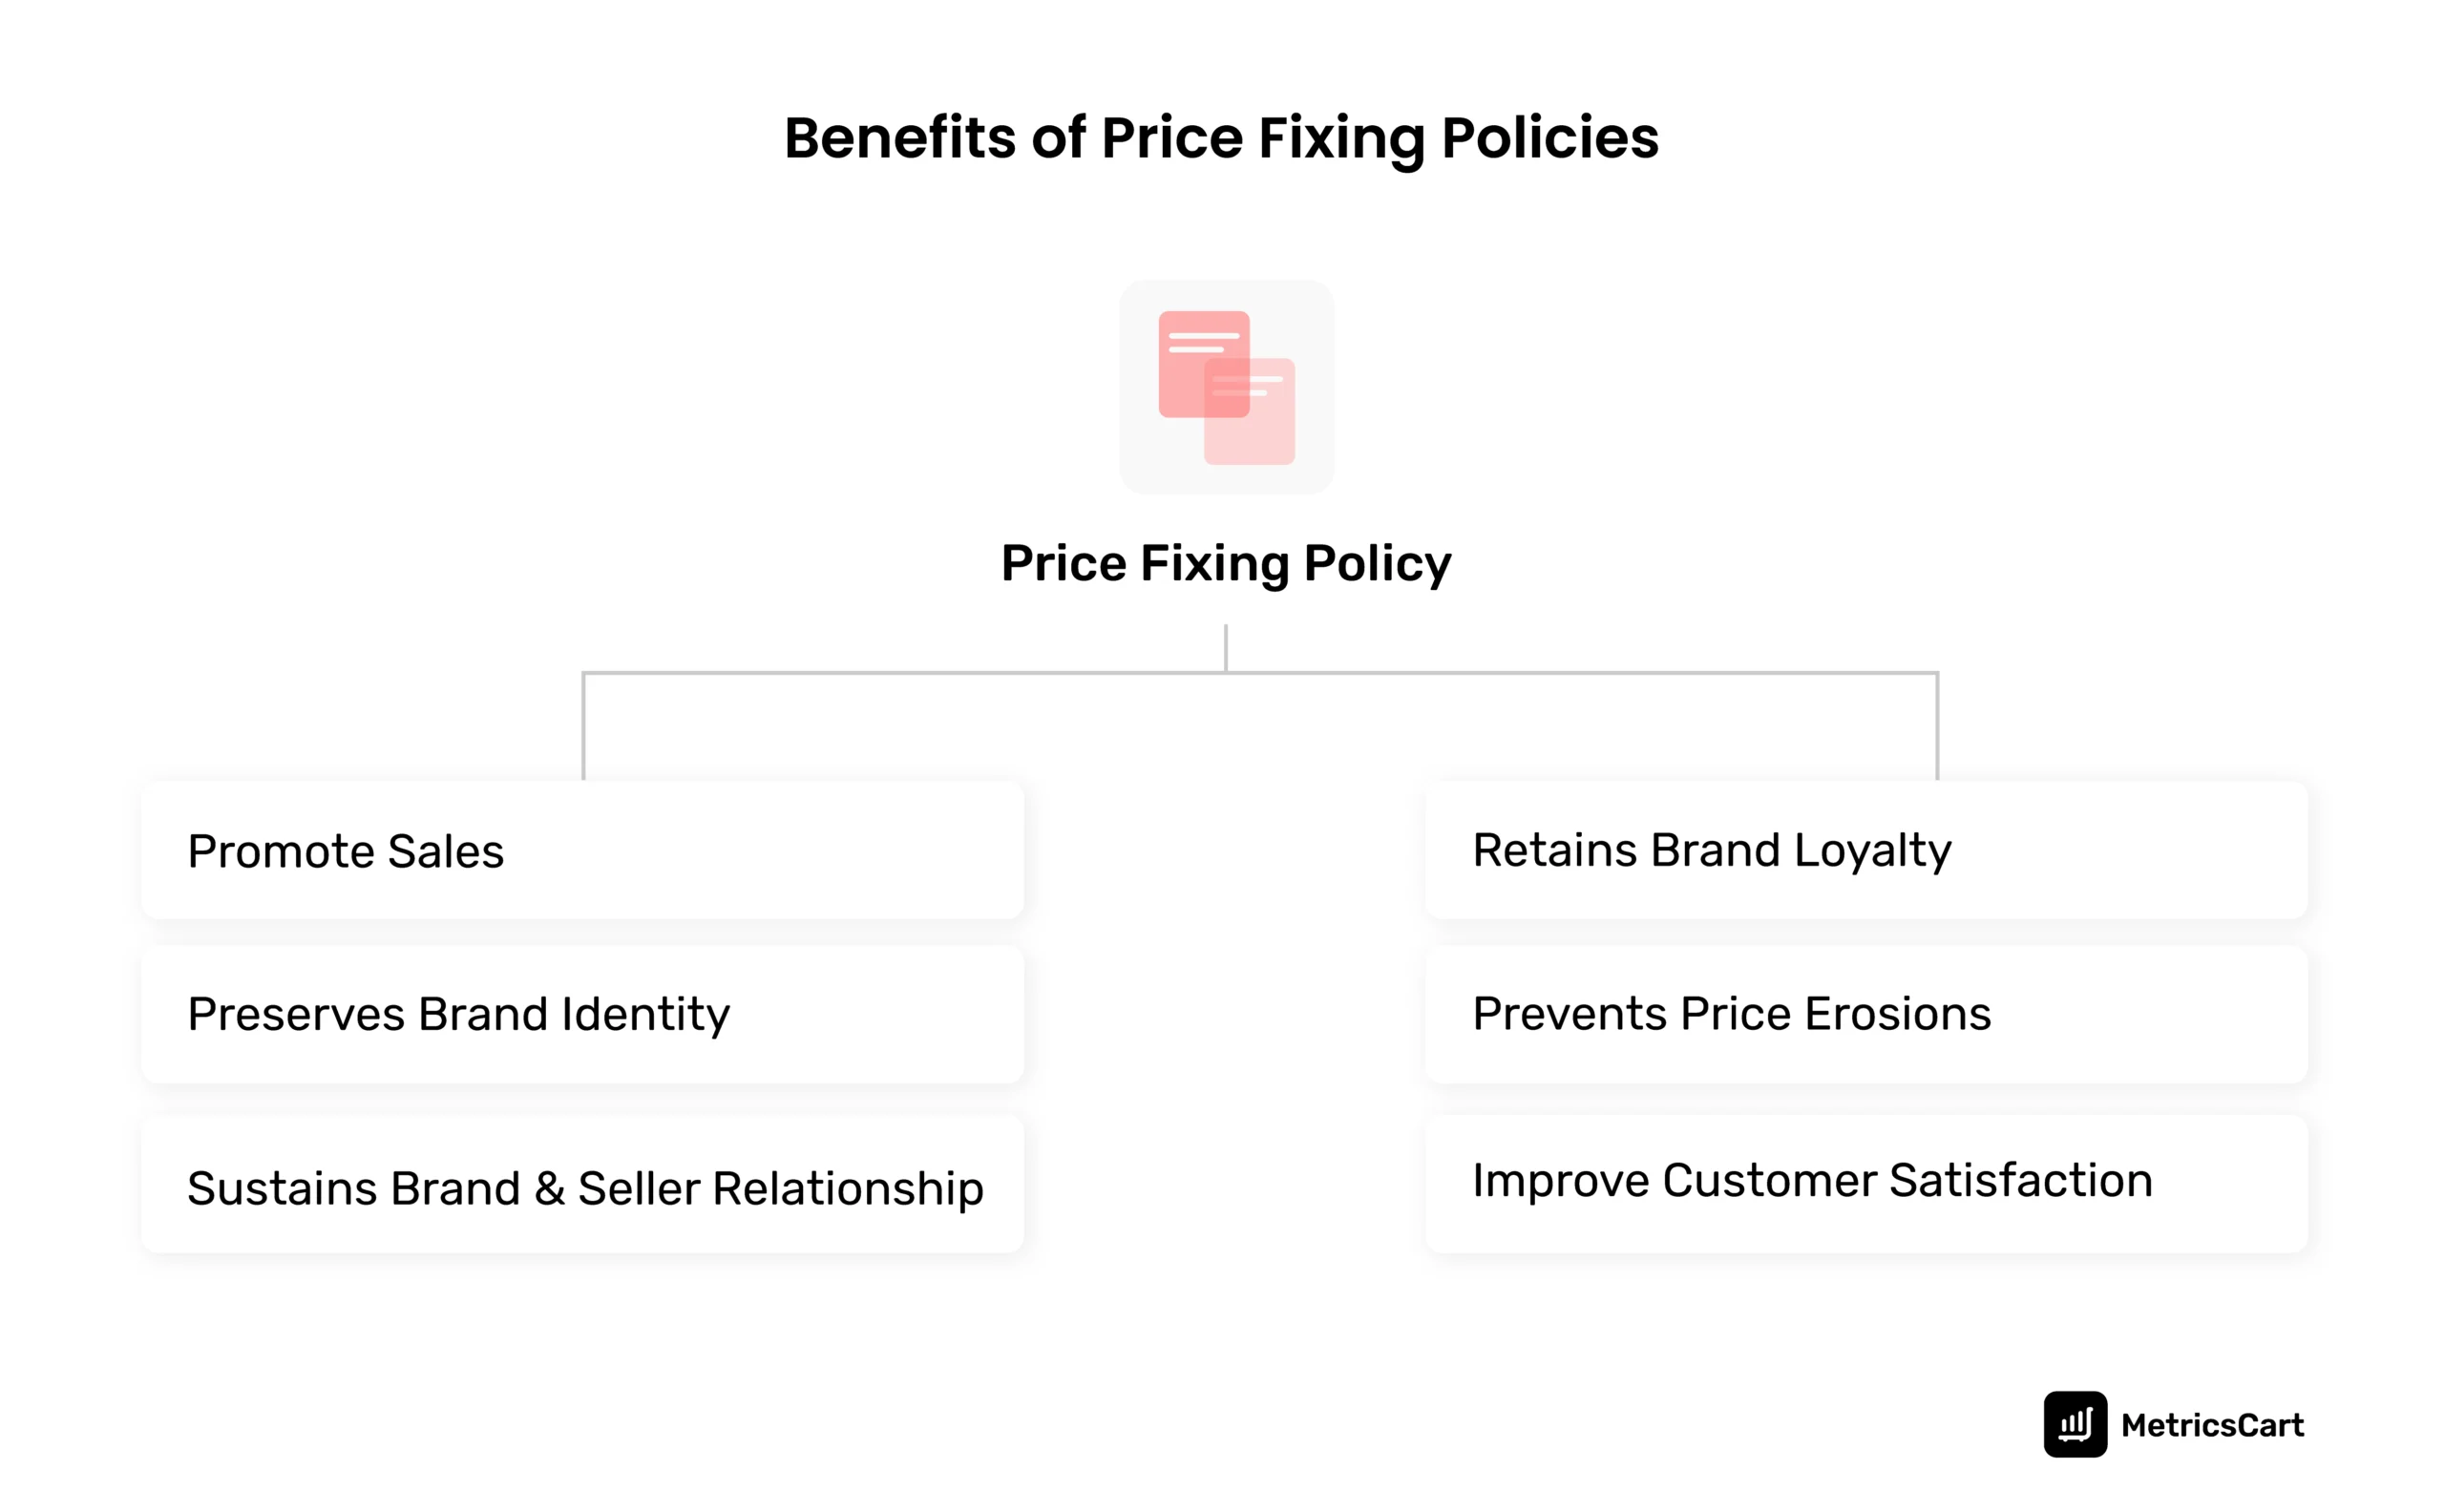 An image explaining the benefits of price-fixing policies